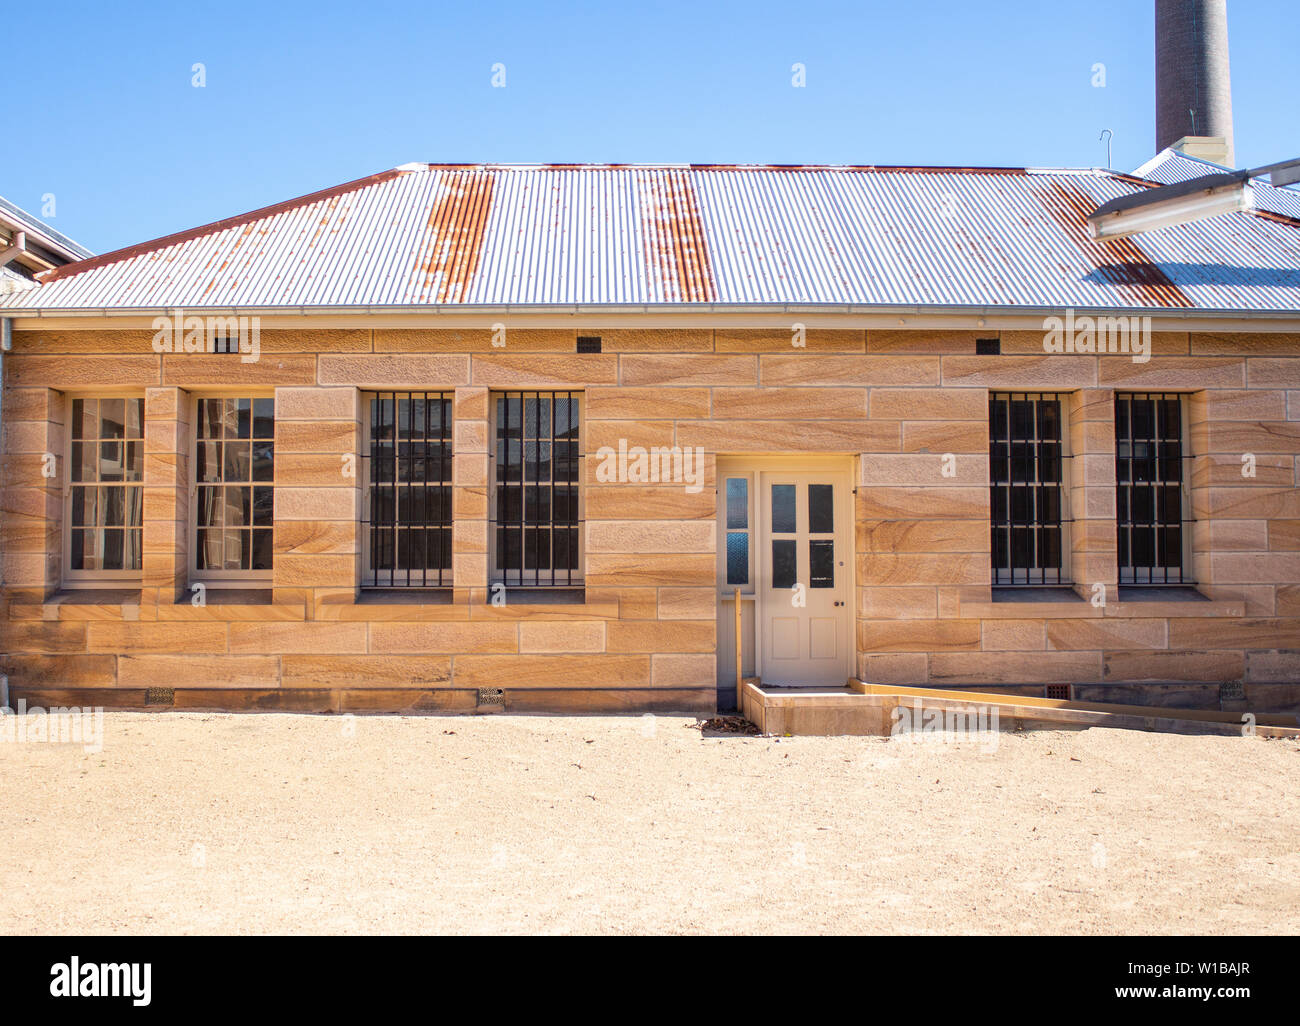 Sandstone convict brick building with corrugated iron roof, large tall windows, security grill, pebble courtyard against clear blue sky Stock Photo